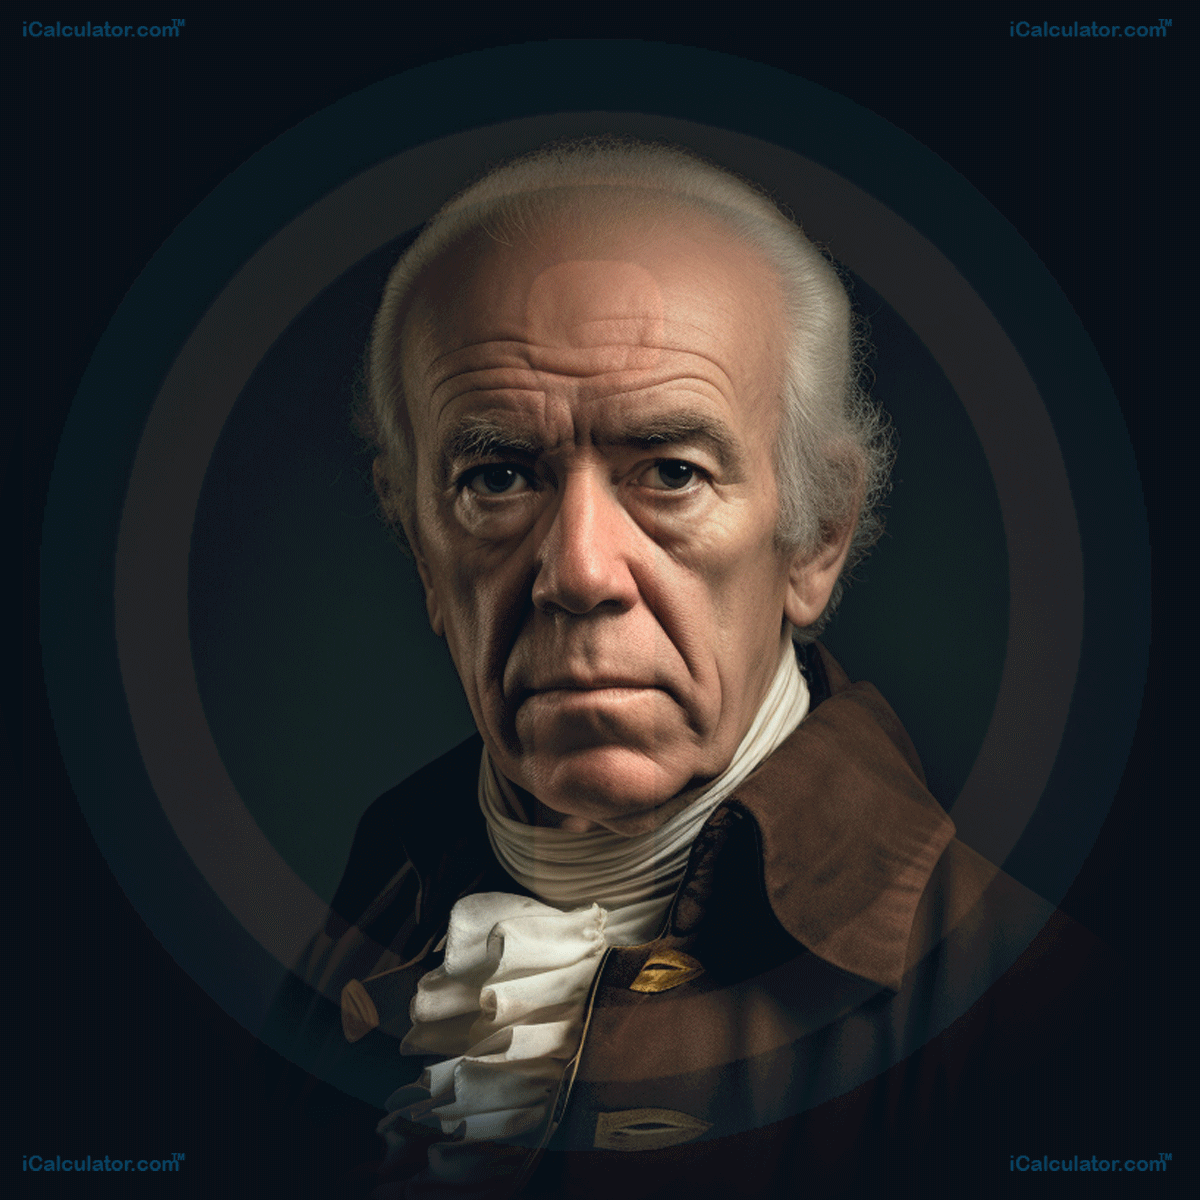 This image shows the physists James Watt, a renowned scientist who advanced the world of phyics. James Watt Biography